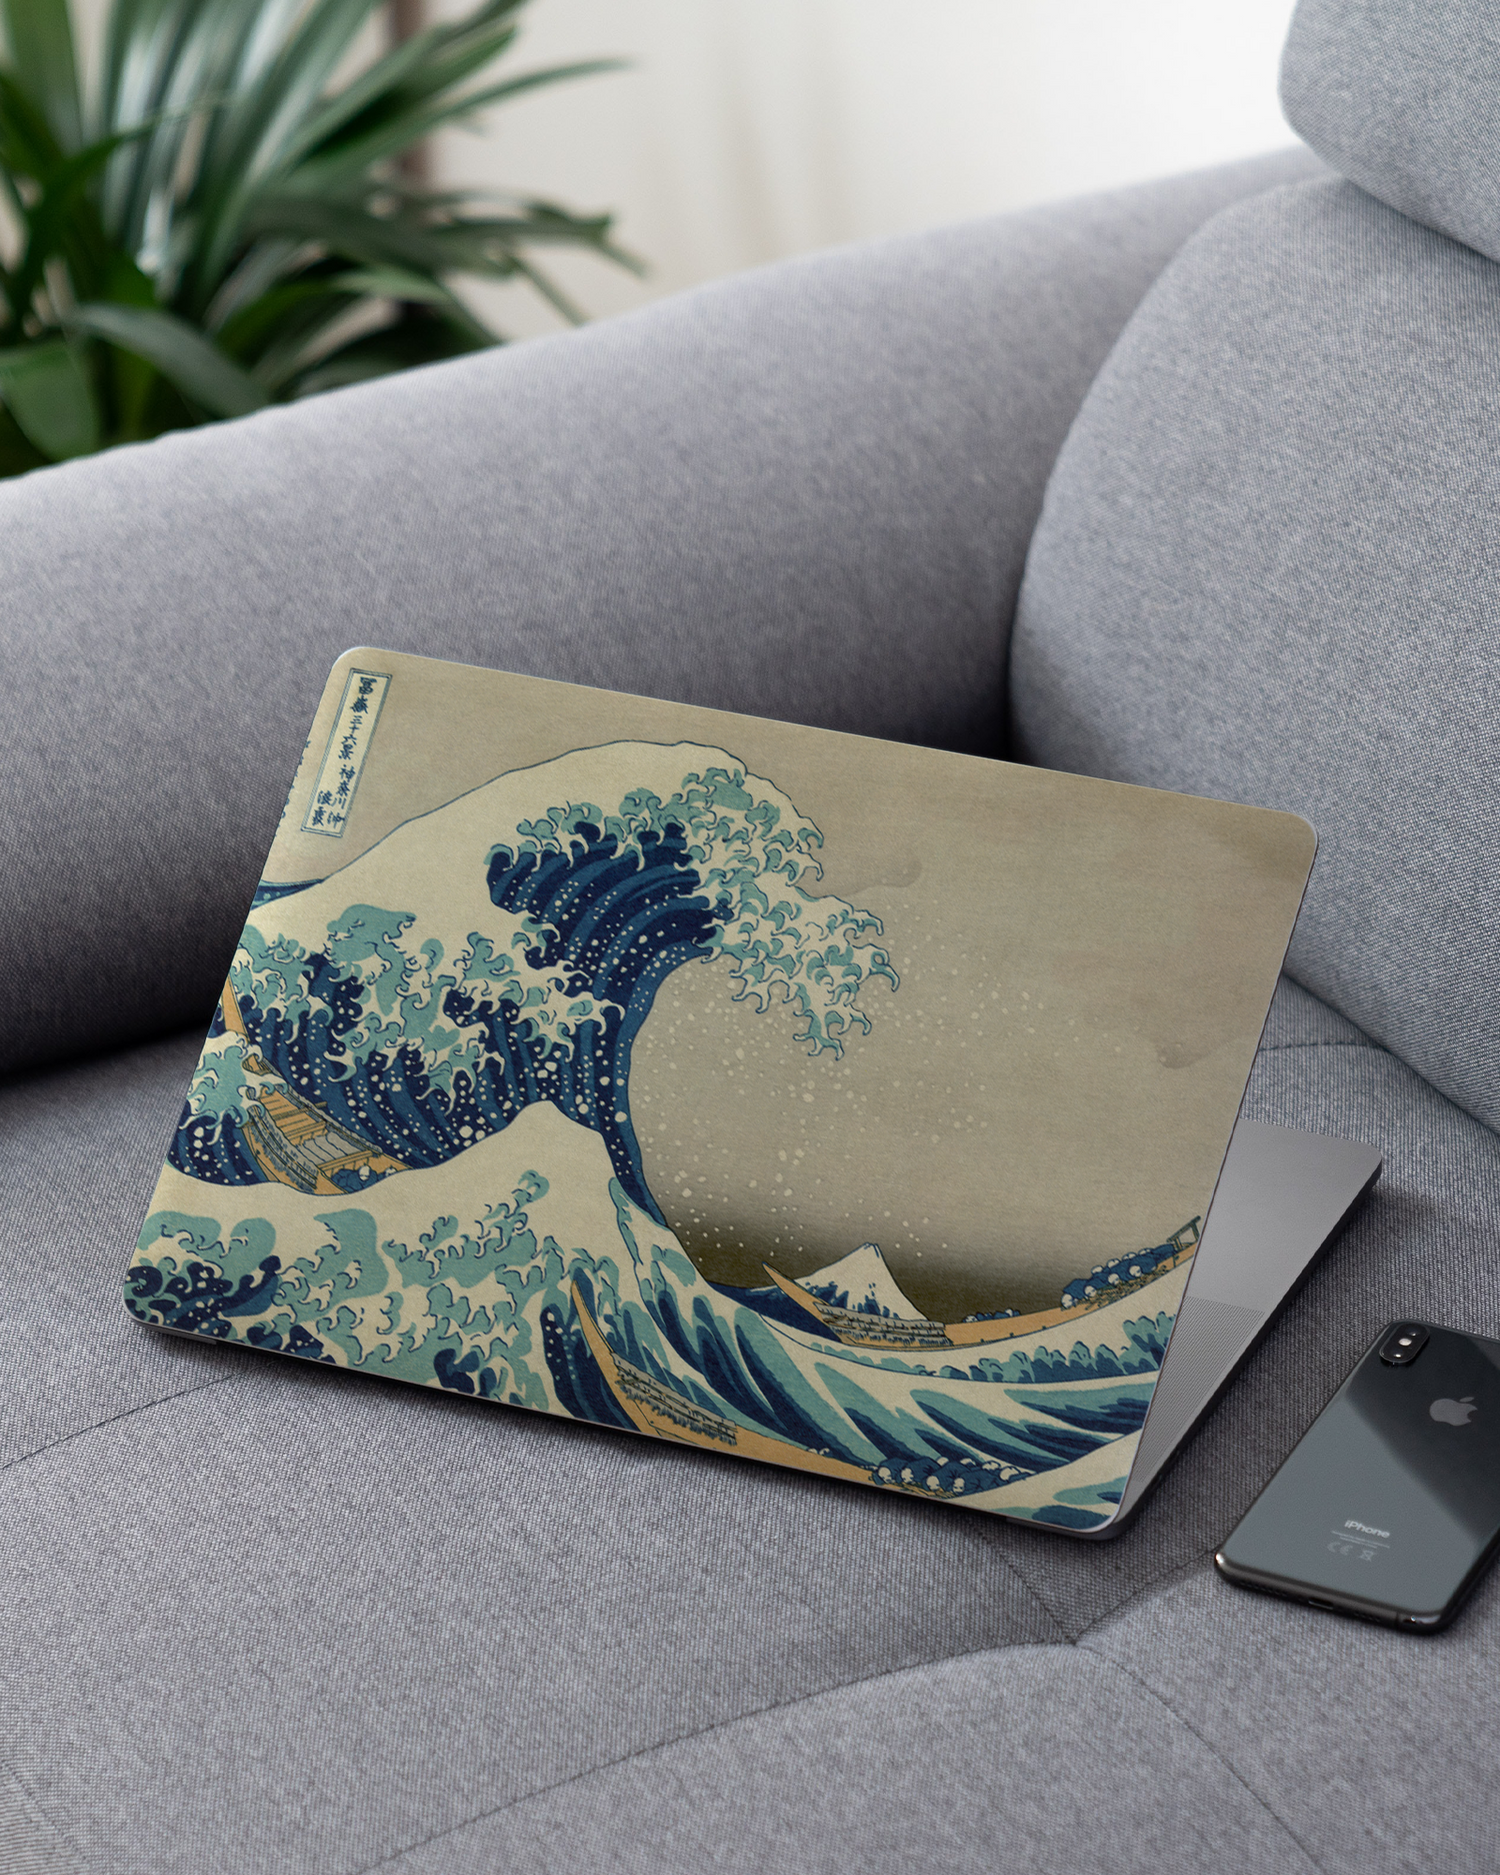 Great Wave Off Kanagawa By Hokusai Laptop Skin for 13 inch Apple MacBooks on a couch